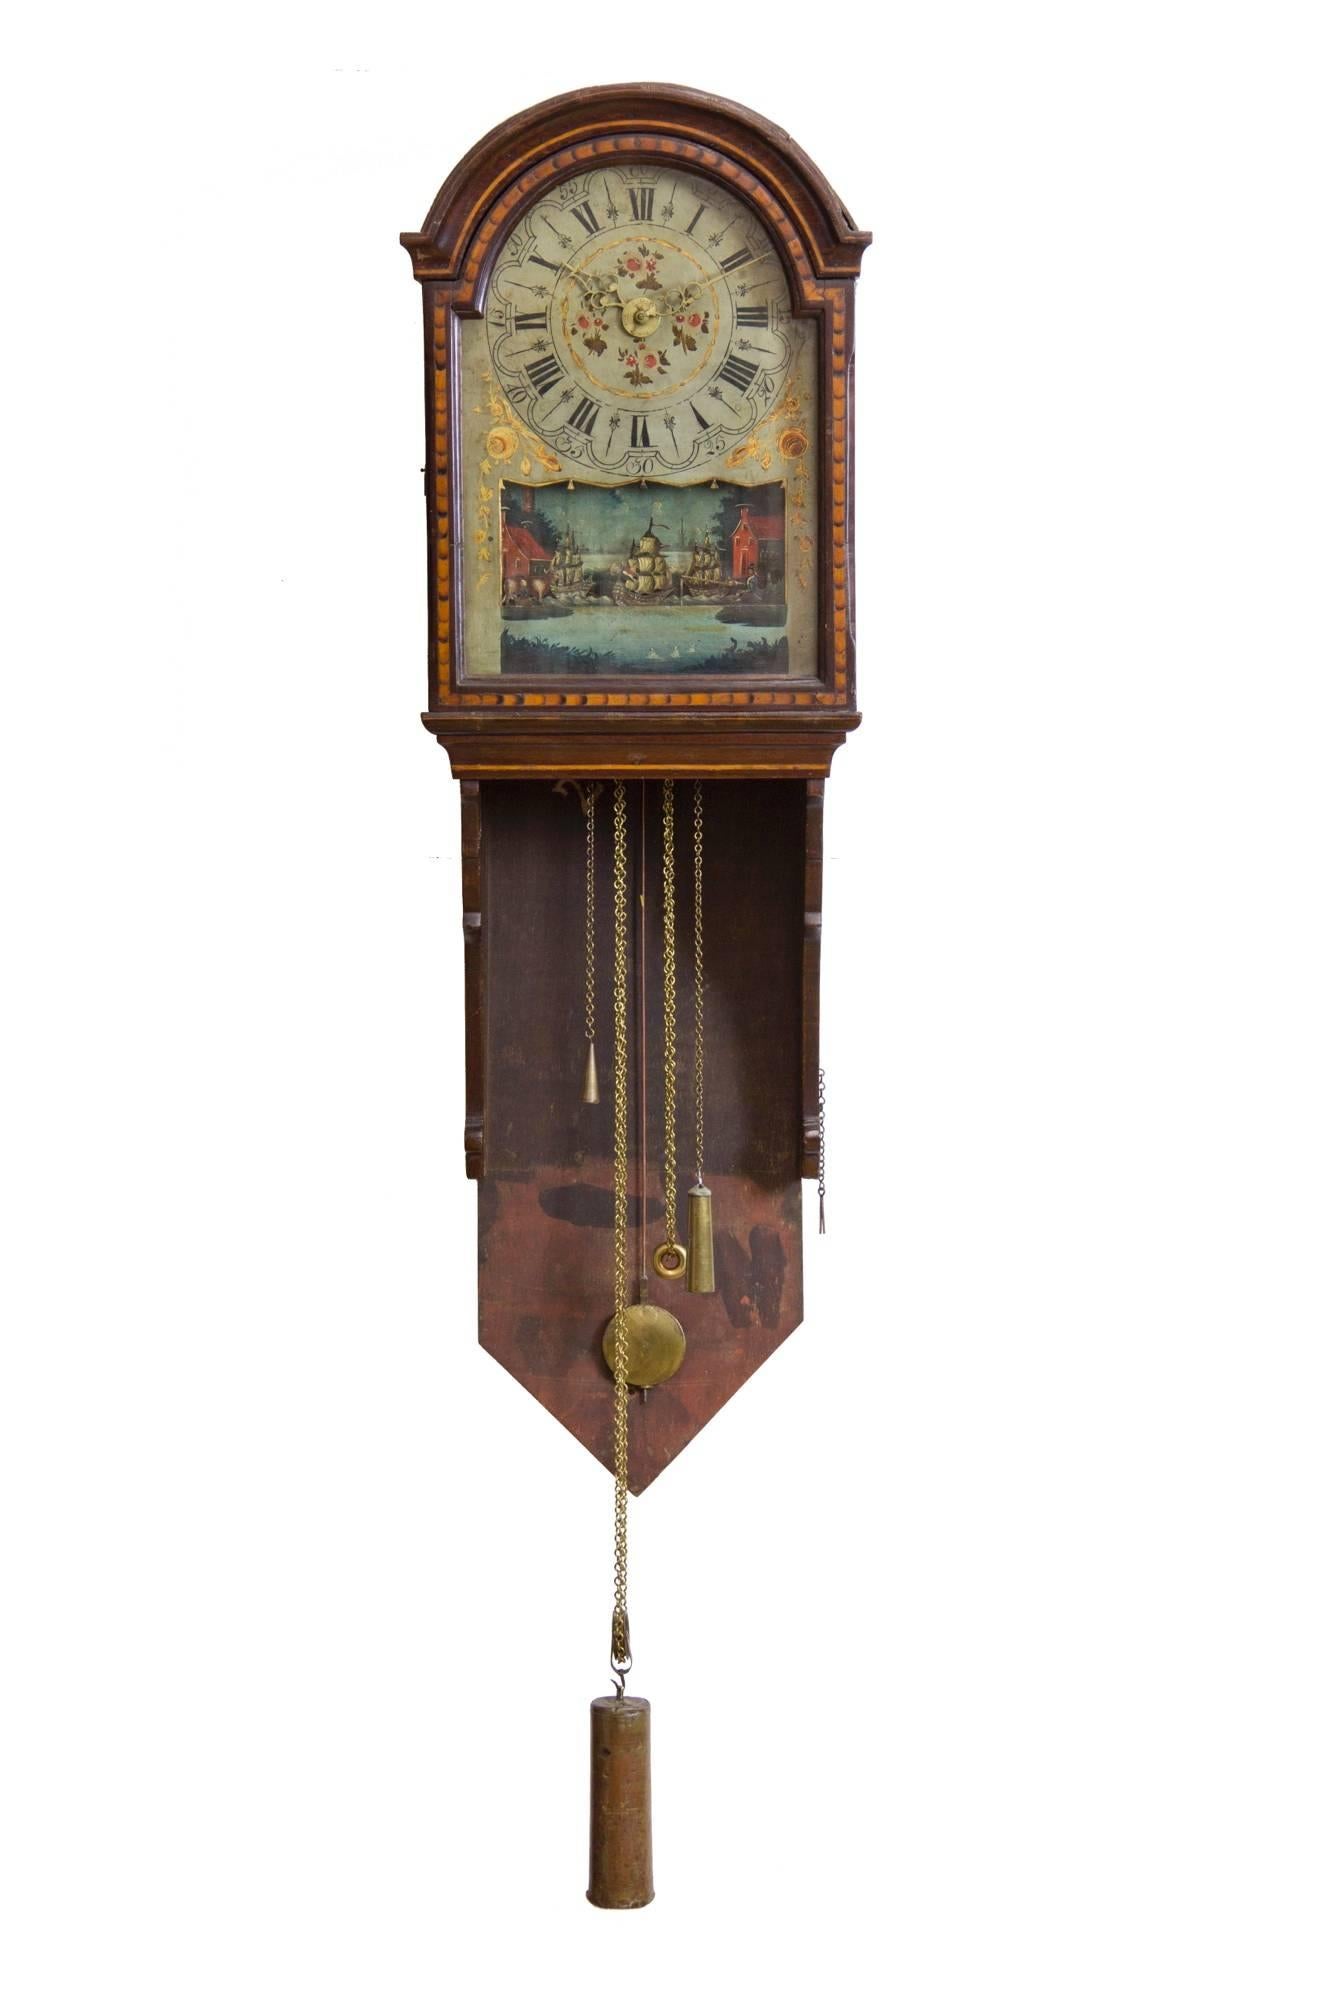 This clock form, unique to Scandinavia, is one of the best and most complicated of the form (see attached basic models). The case has beautiful marquetry throughout, and retains an older historic surface. The beauty of the case complements the